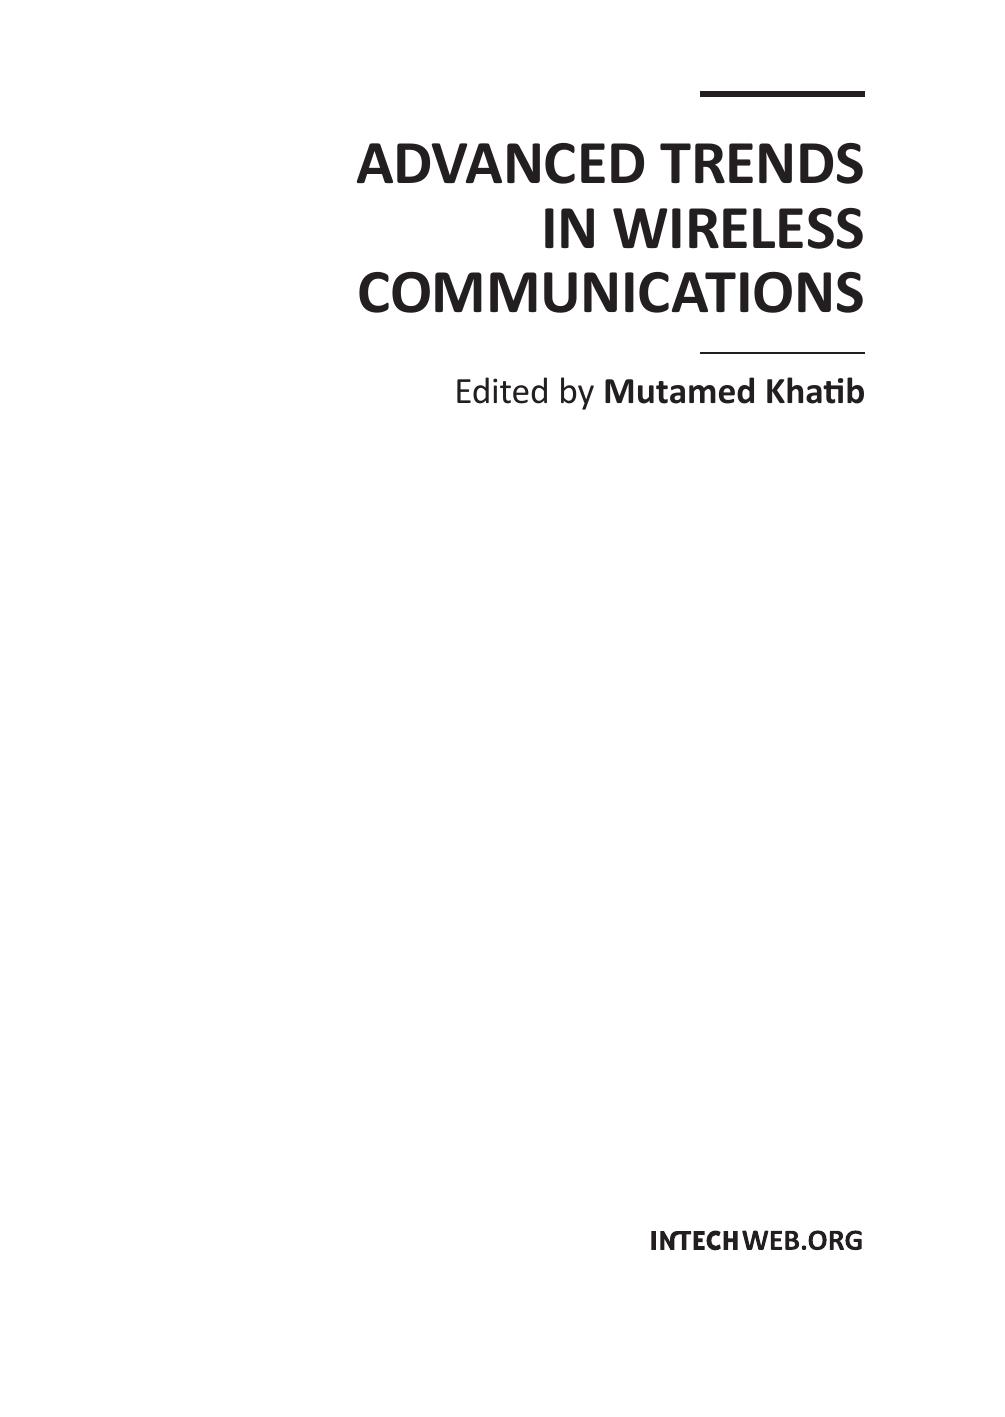 Advanced Trends in Wireless Communications.indd